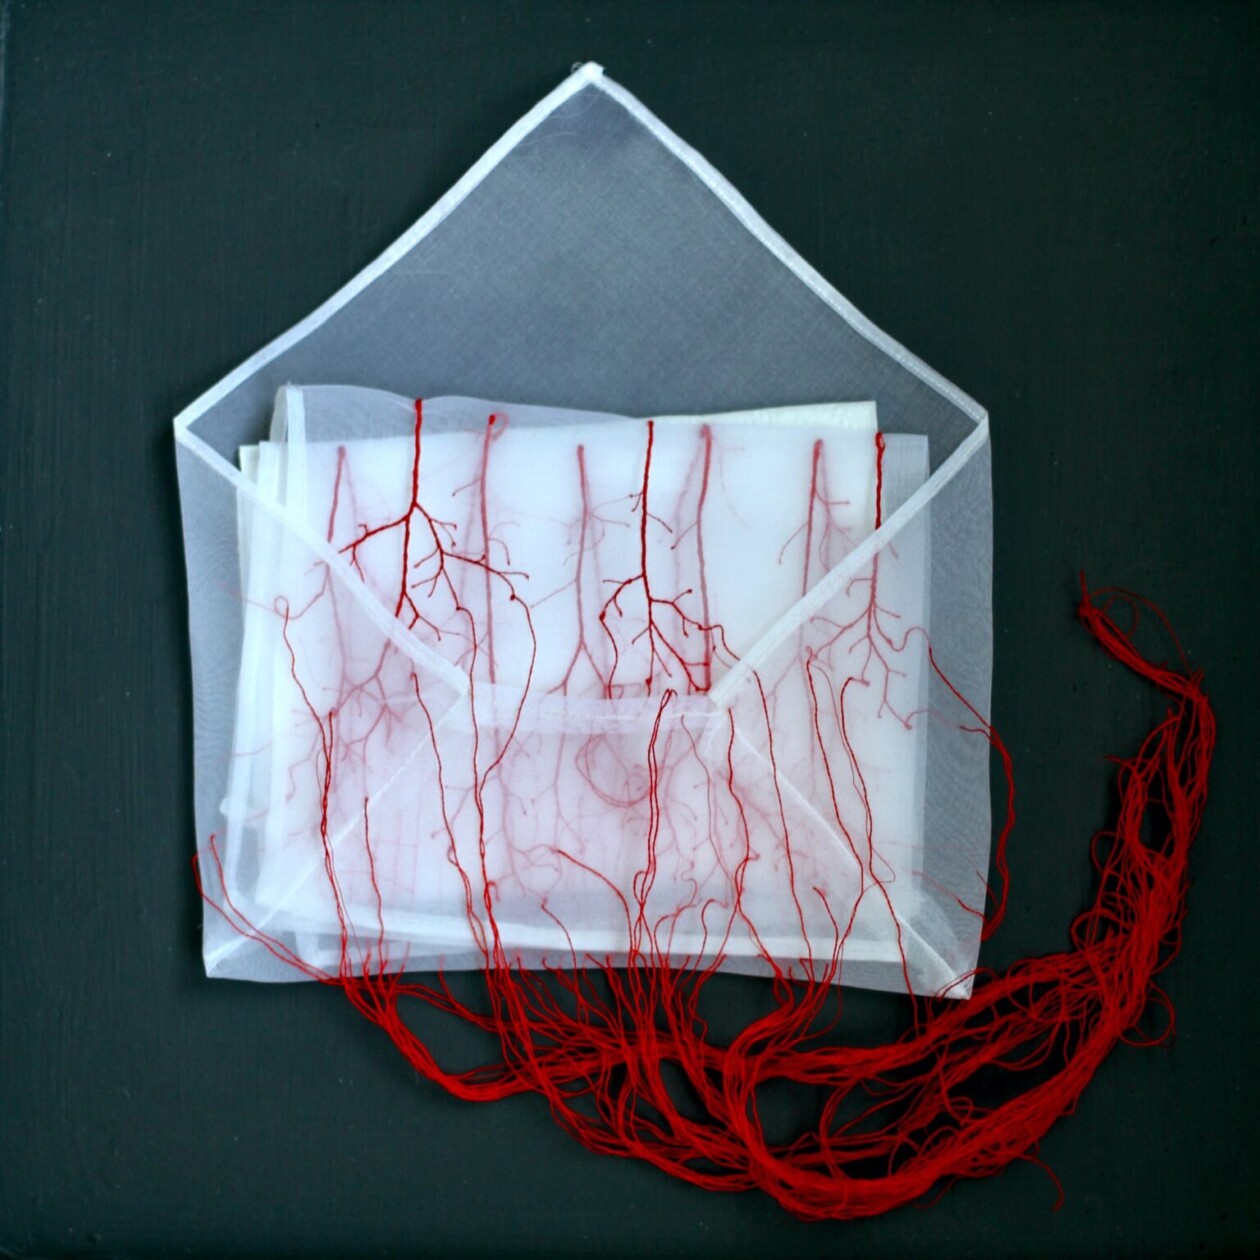 Red Threads, Intriguing Mixed Media Sculptures By Rima Day (4)